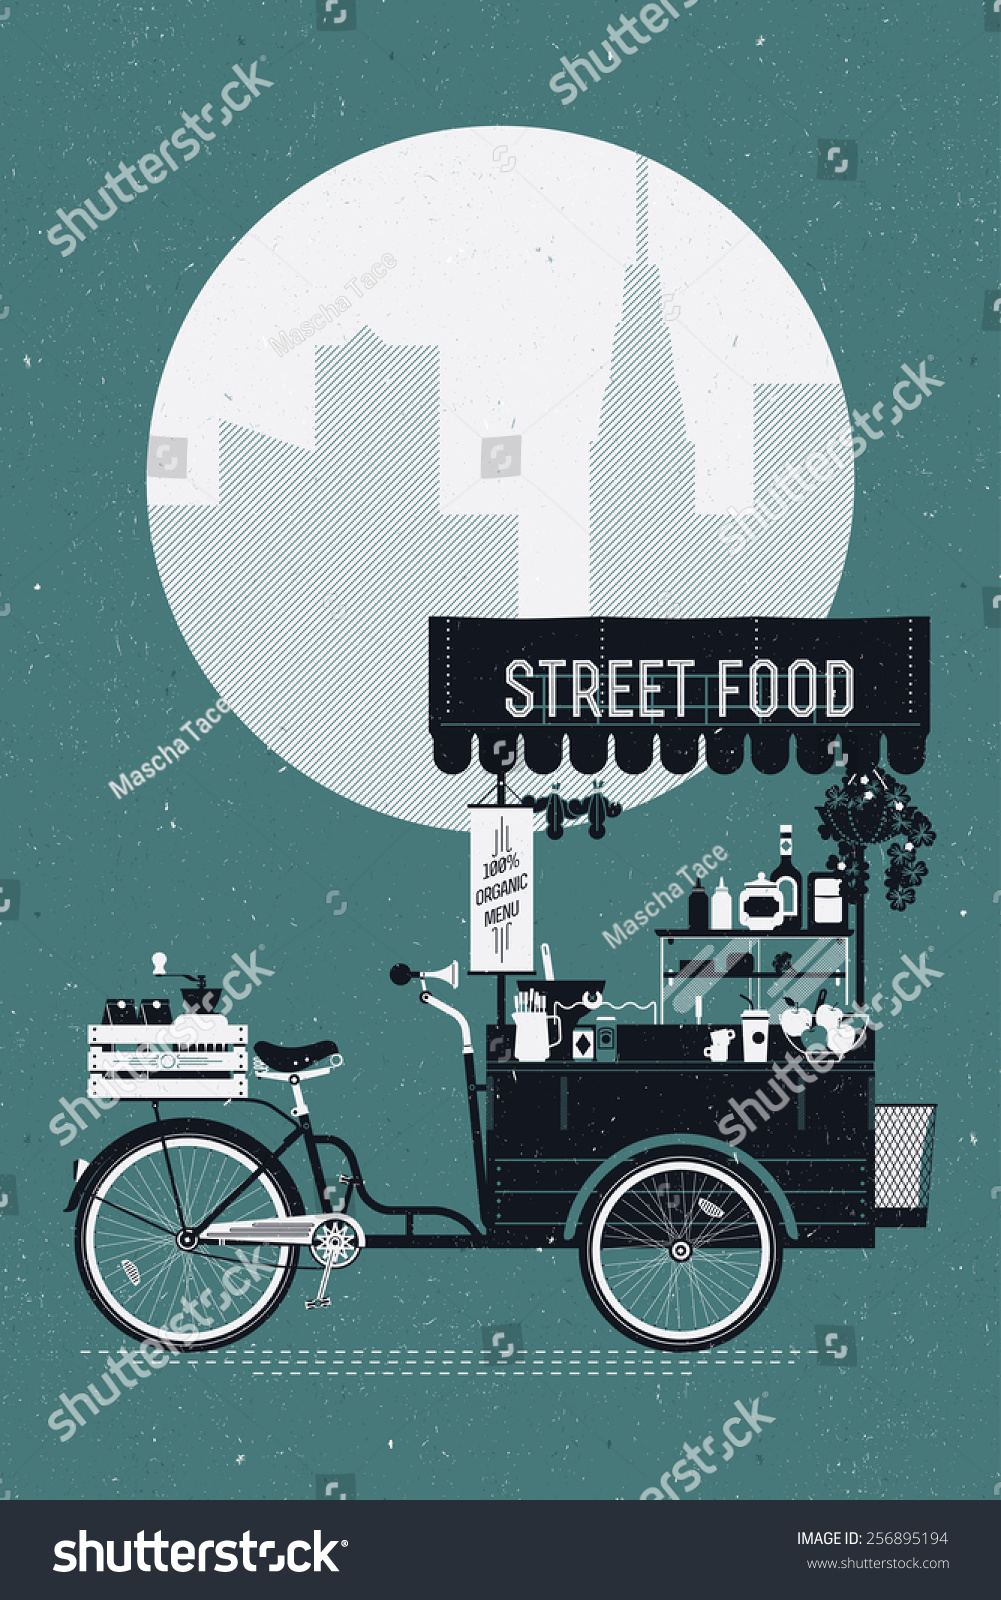 SVG of Creative vector detailed printable poster or banner template on street food with retro looking vending bicycle cart with awning on abstract city silhouette background svg